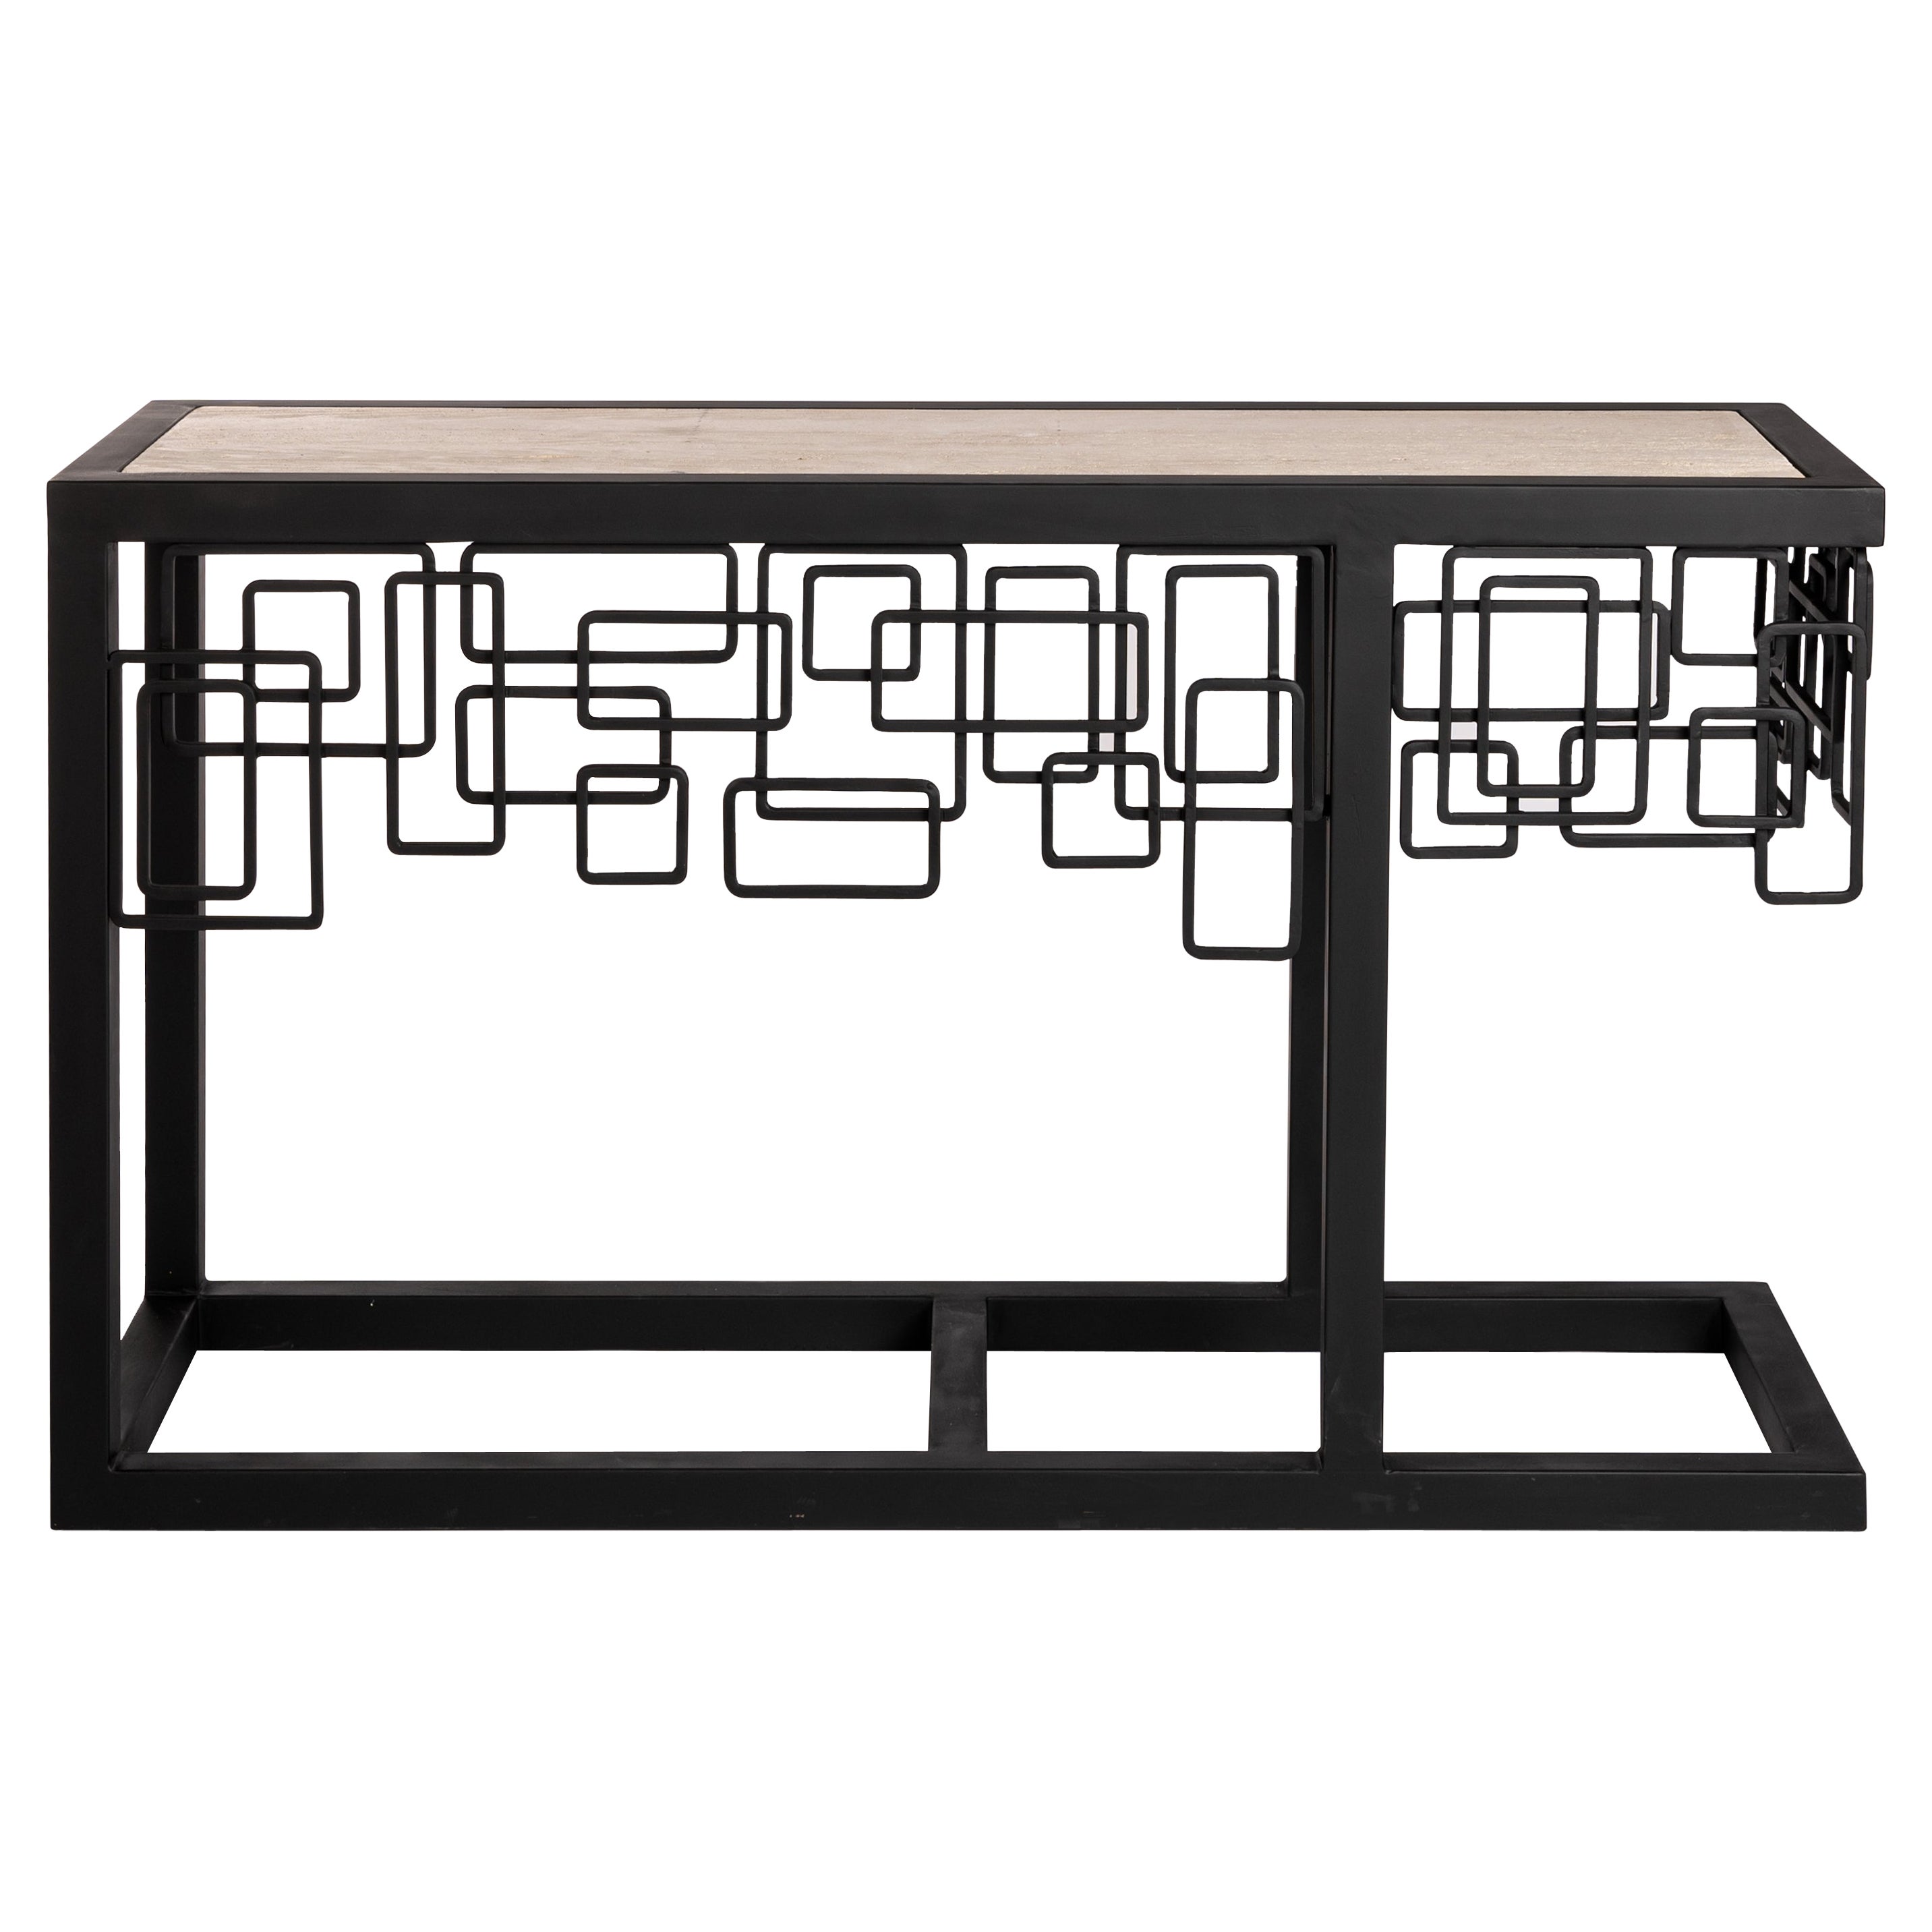 Italian Mid-Century Modern solid iron / travertine console table in phantastic abstract, geometric design.

The object is built in a straight line - the front and the right side are designed with overlying 
square and rectangular elements in the